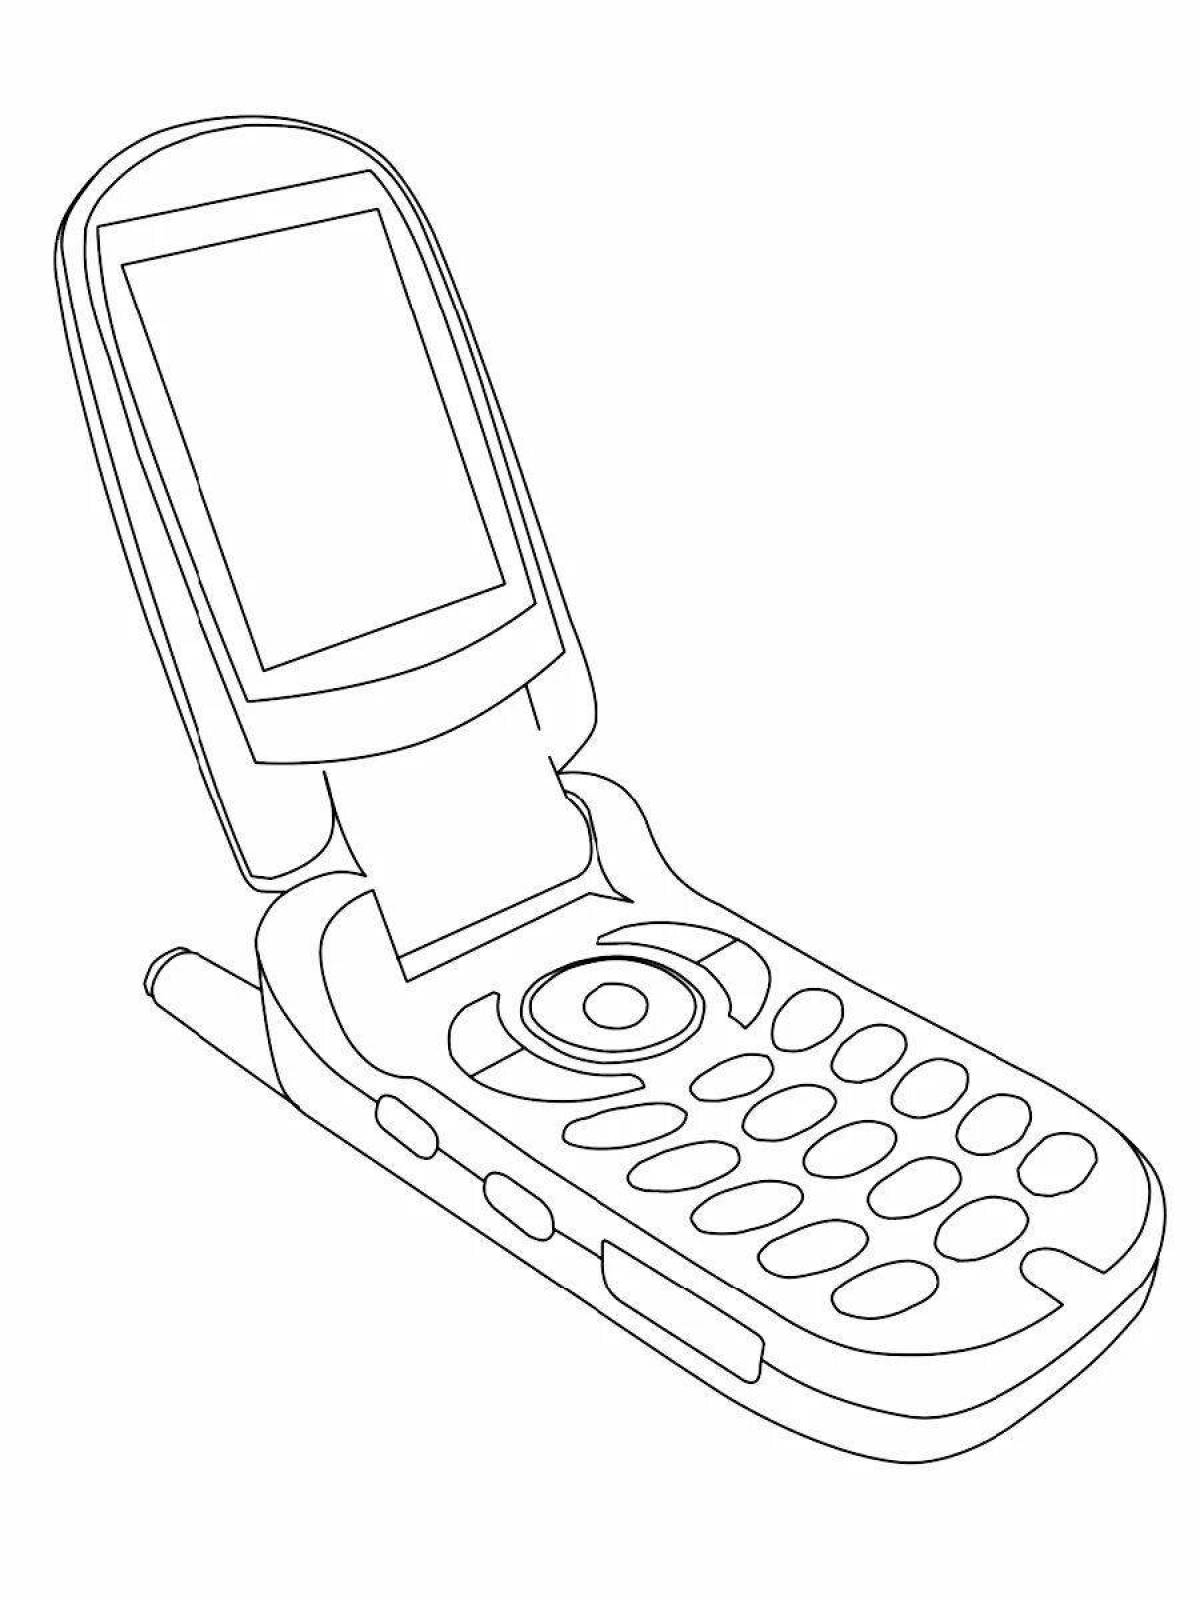 Color-delight phone coloring page for boys